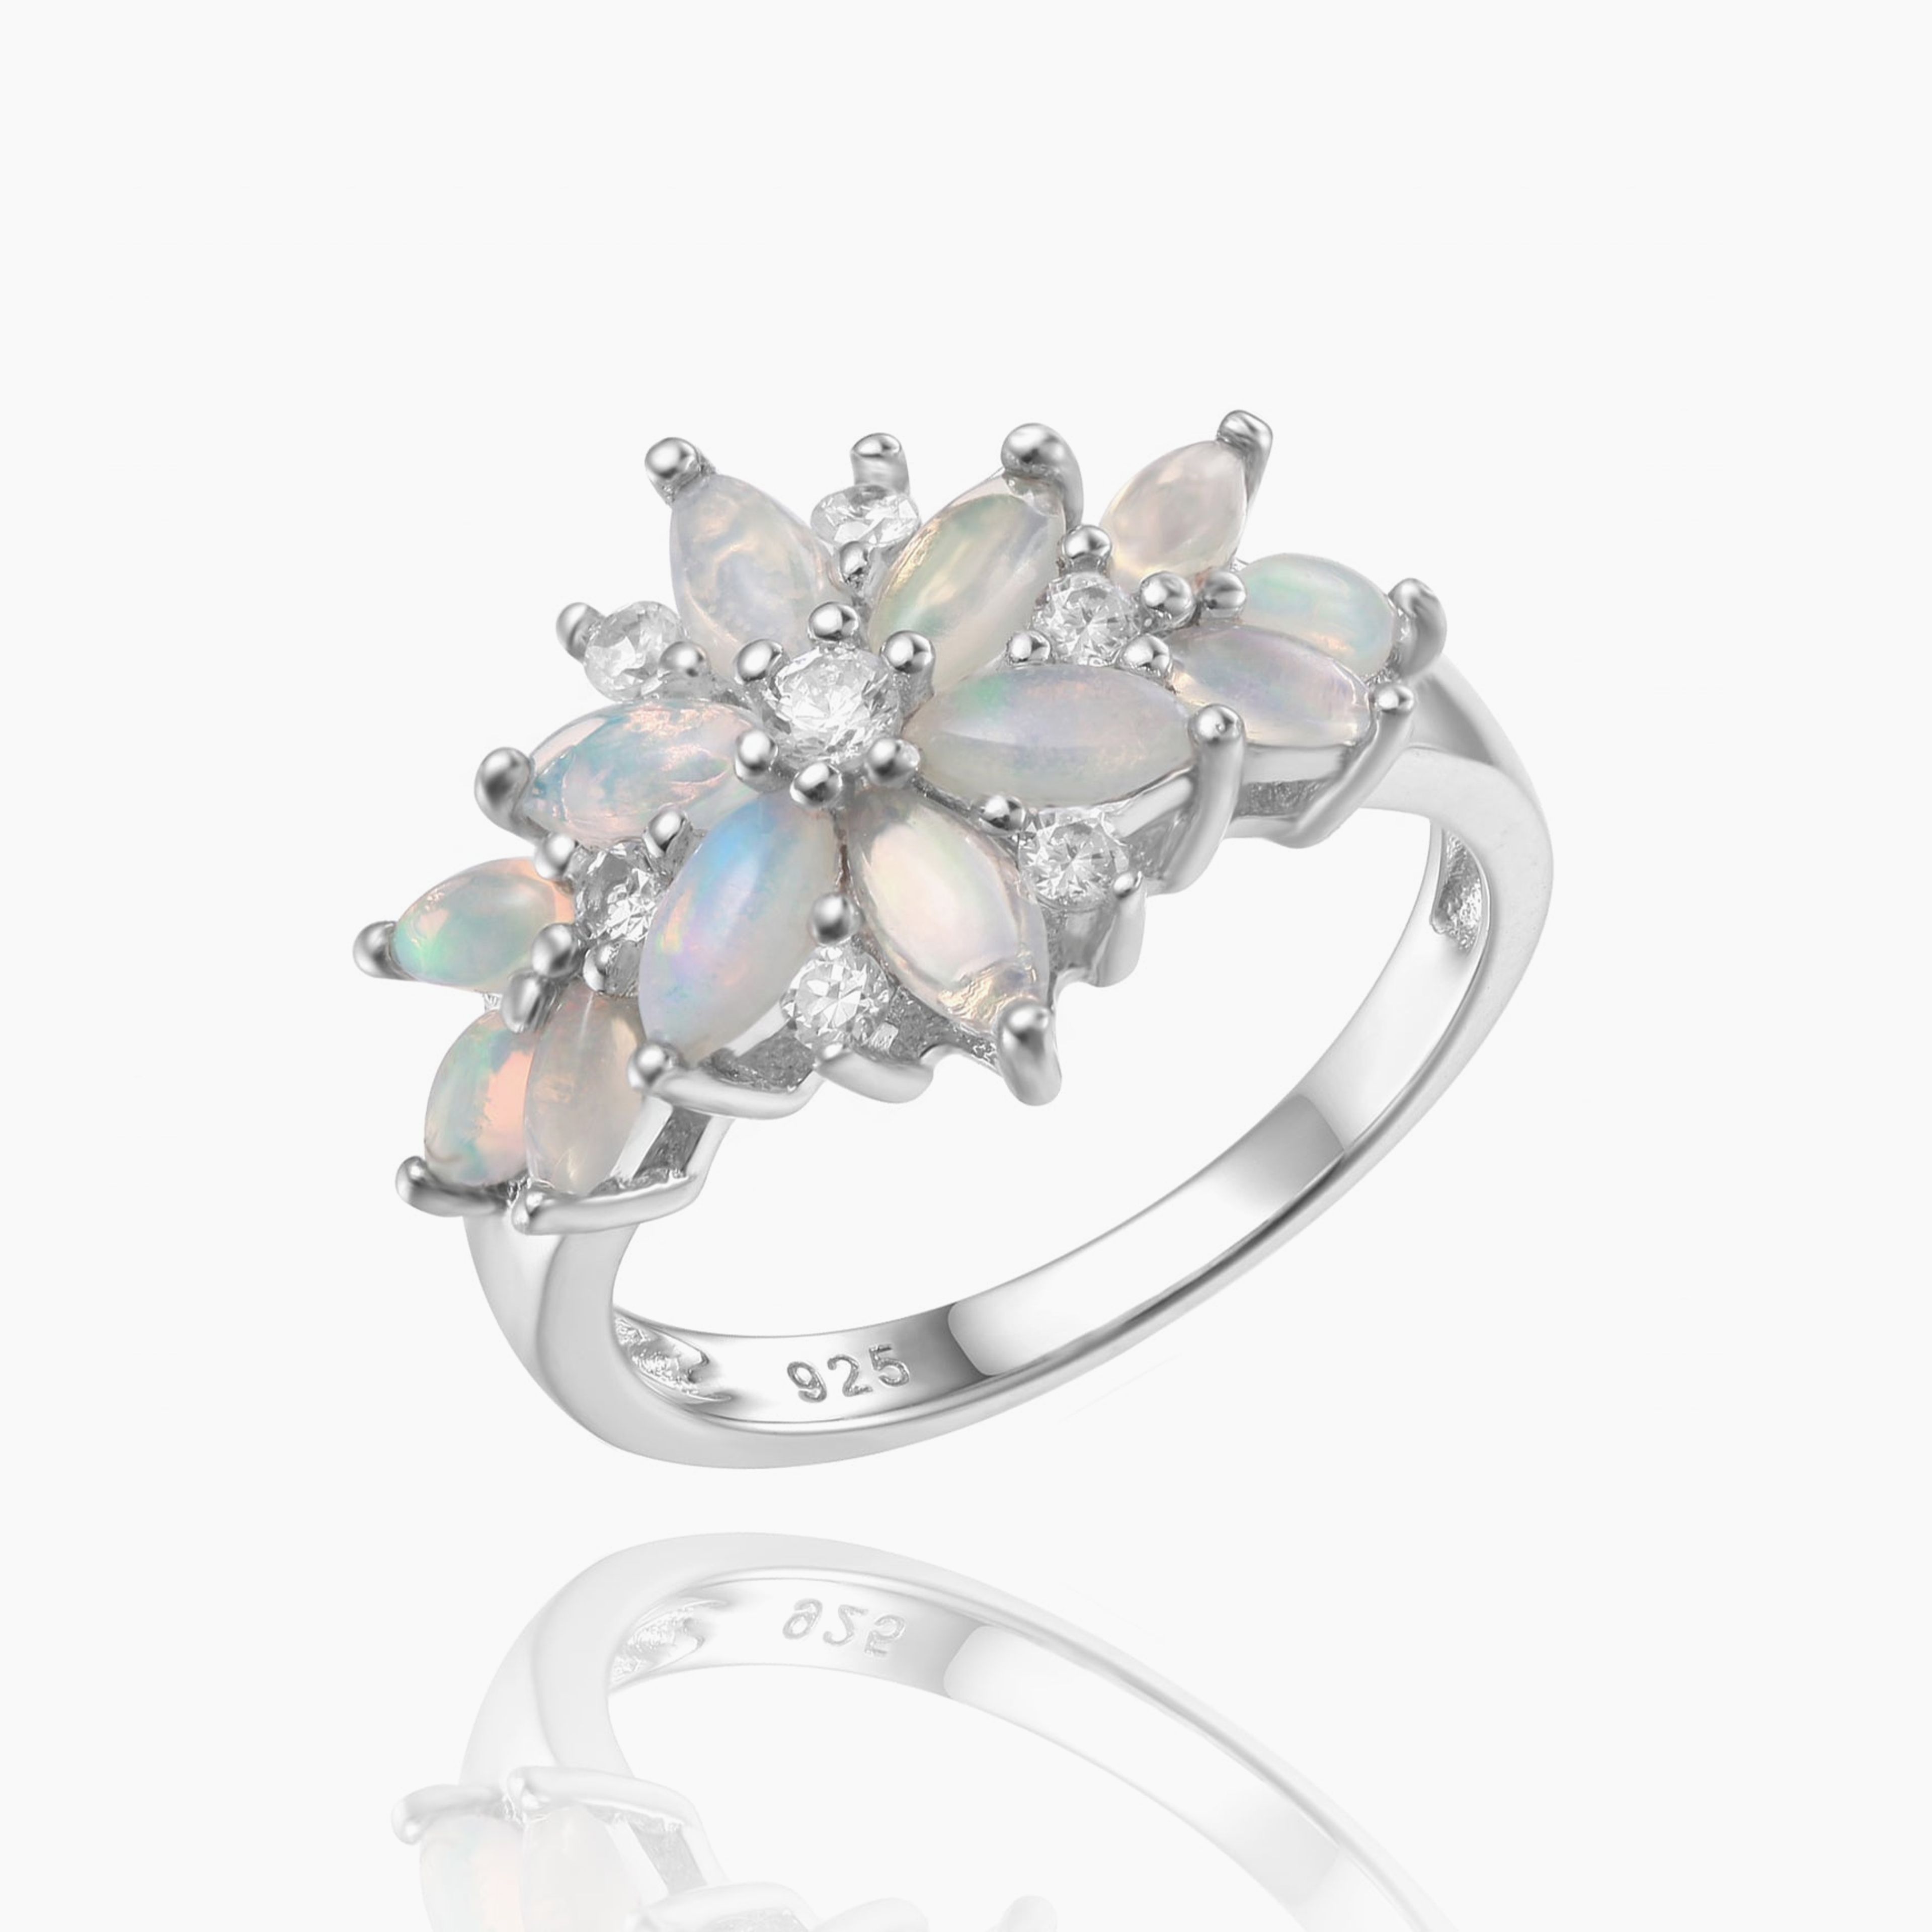 Ethiopian Opal Ring in Sterling Silver - Handcrafted with Genuine Opal Stone